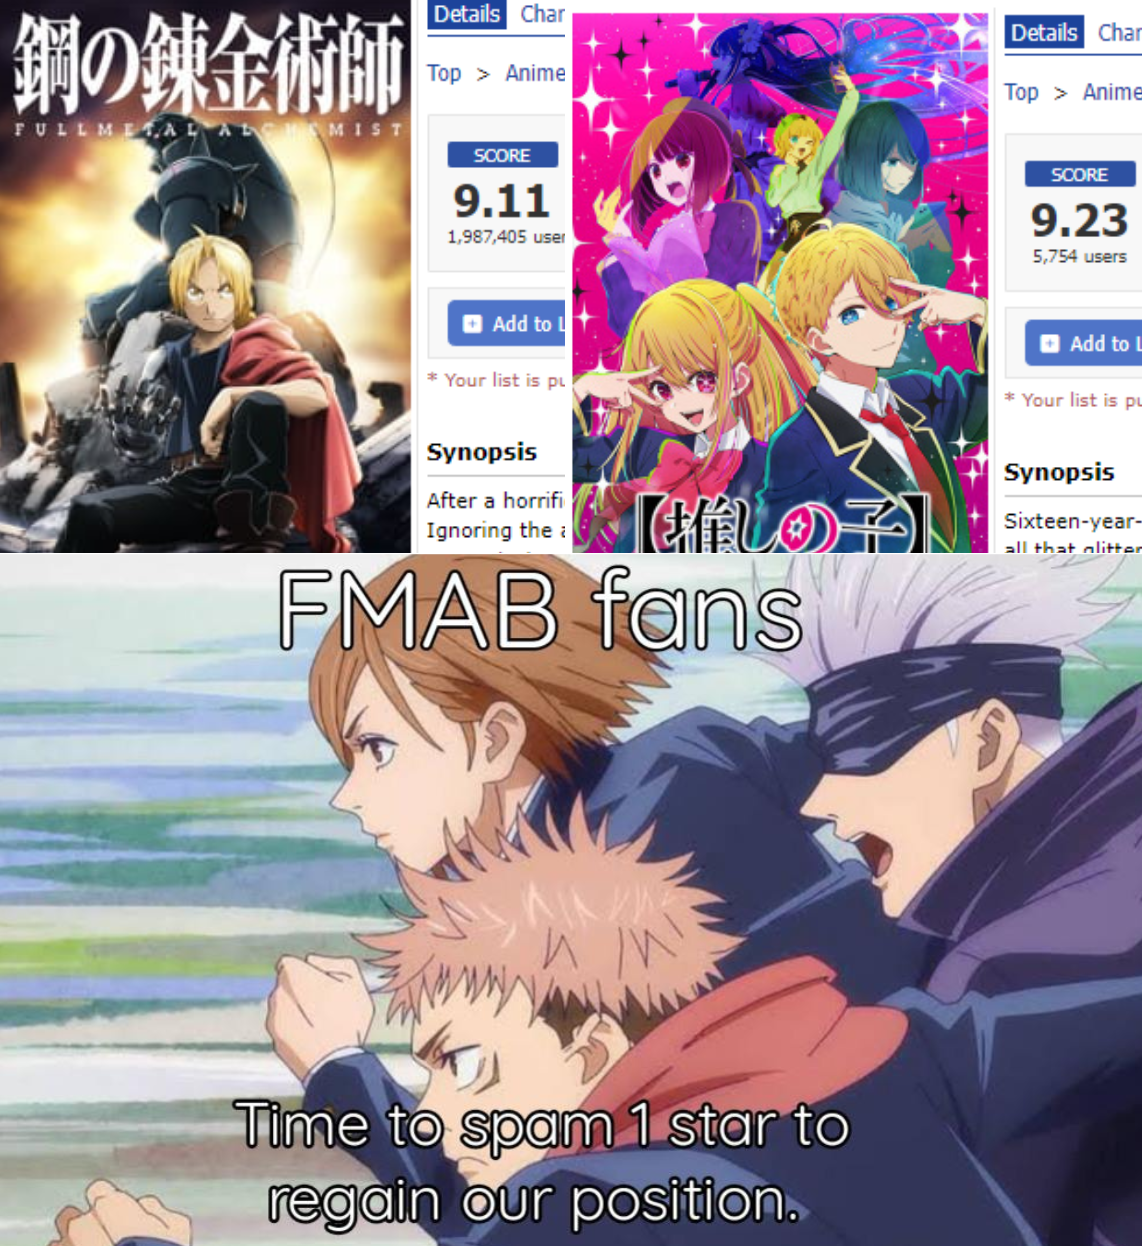 FMAB fans are on their way